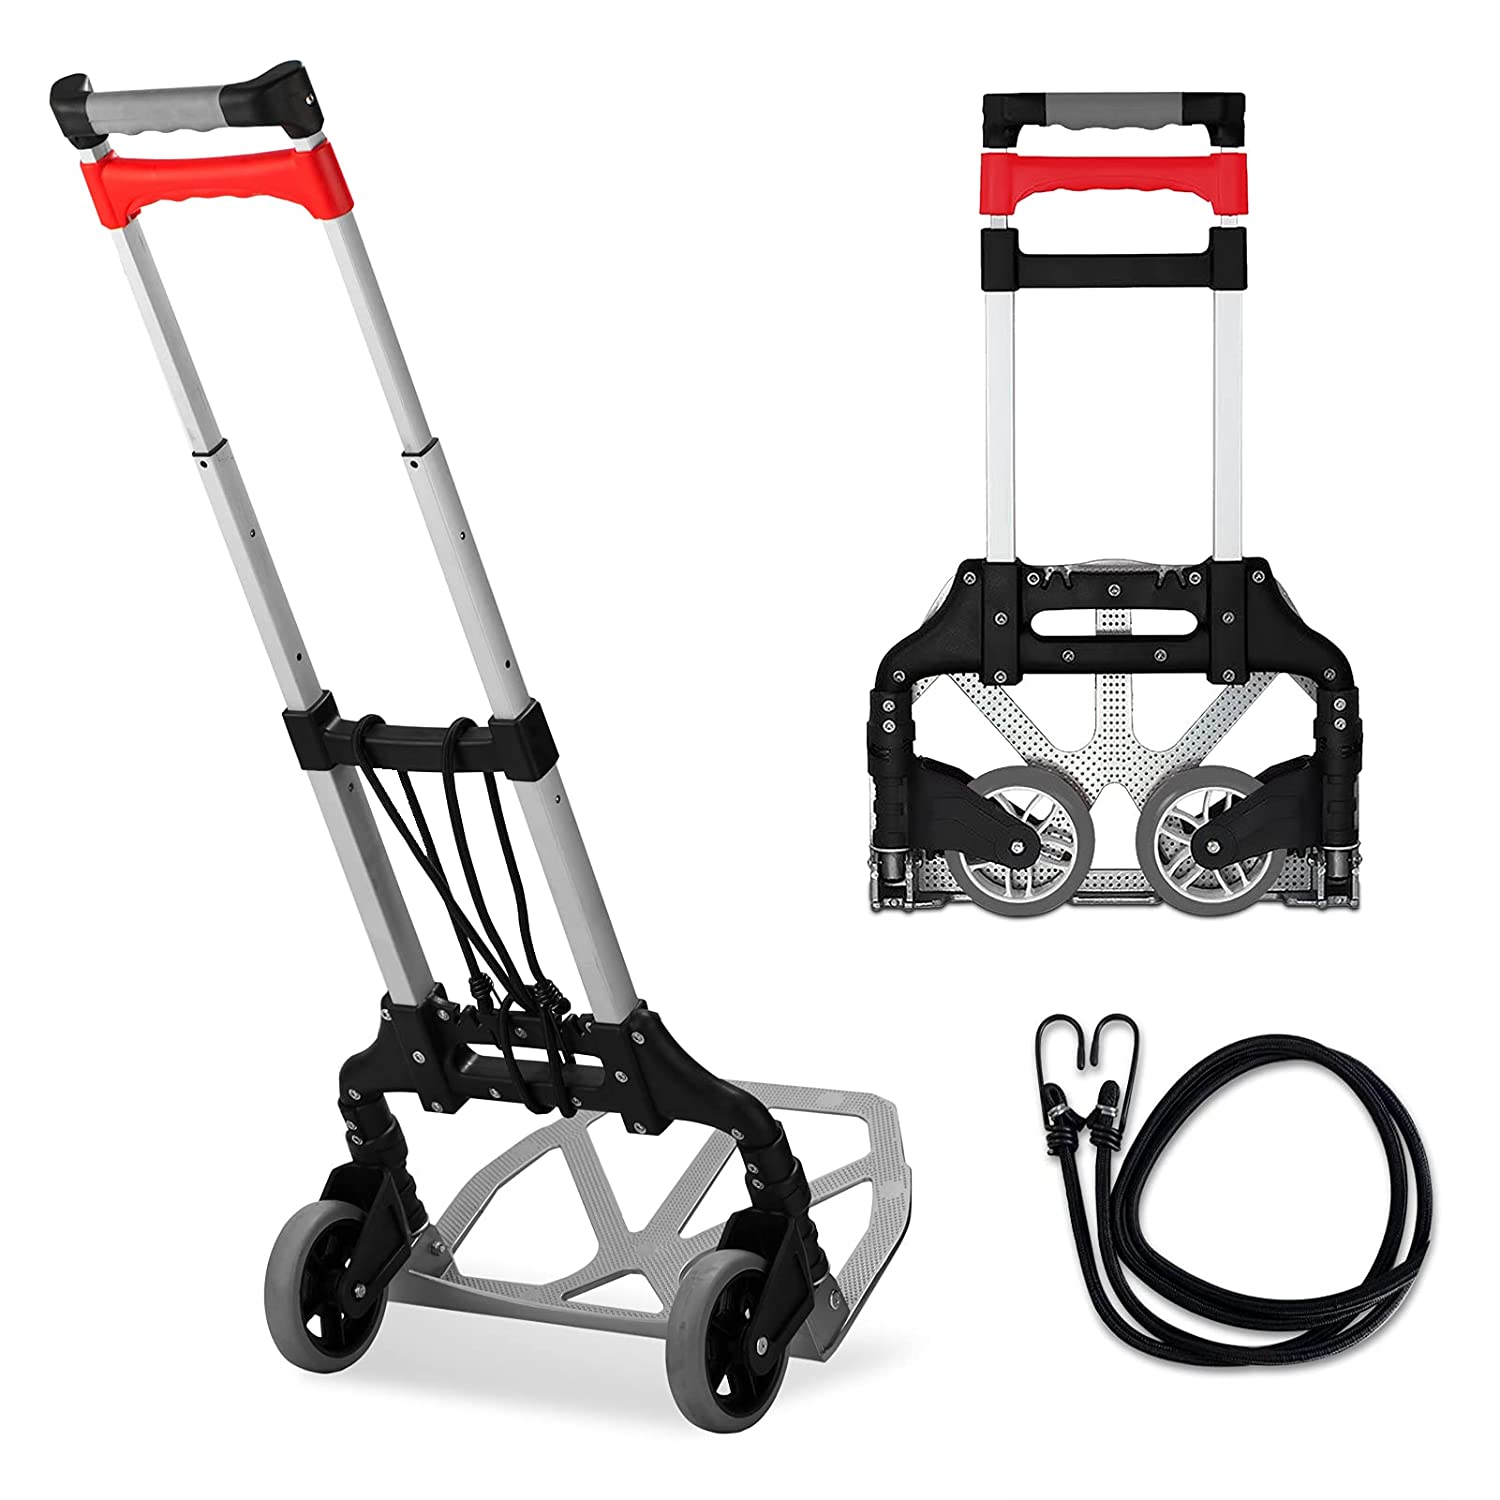 Bonnlo Sack Trucks with Strong Toe Plate Aluminium Multifunctional Dolly Cart,150KG,Red Heavy Duty Sack Barrow Trolley with Wheels